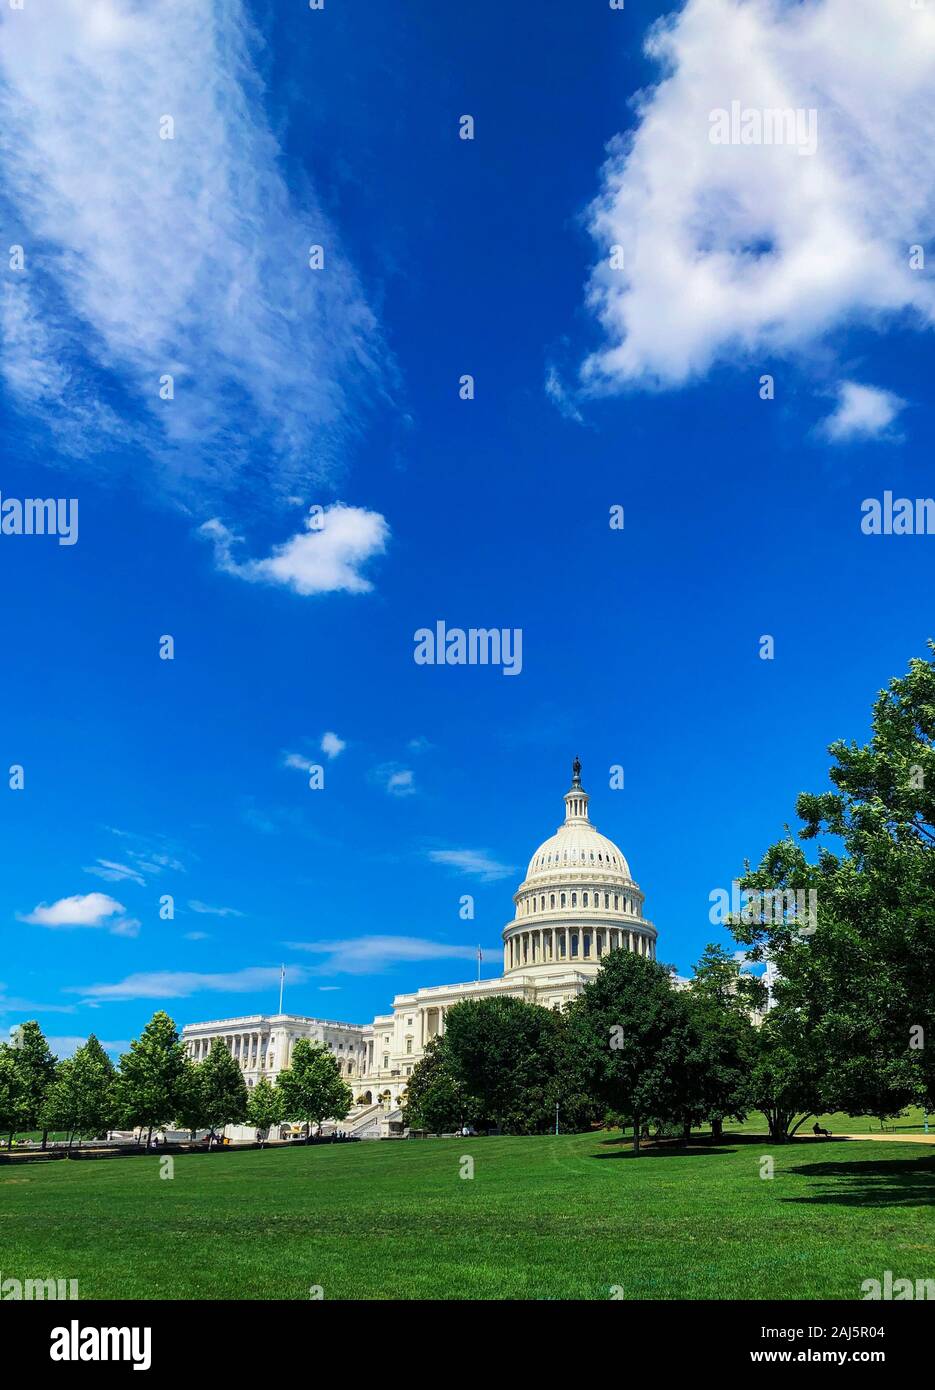 United States Capitol building with grass and blue sky. Stock Photo